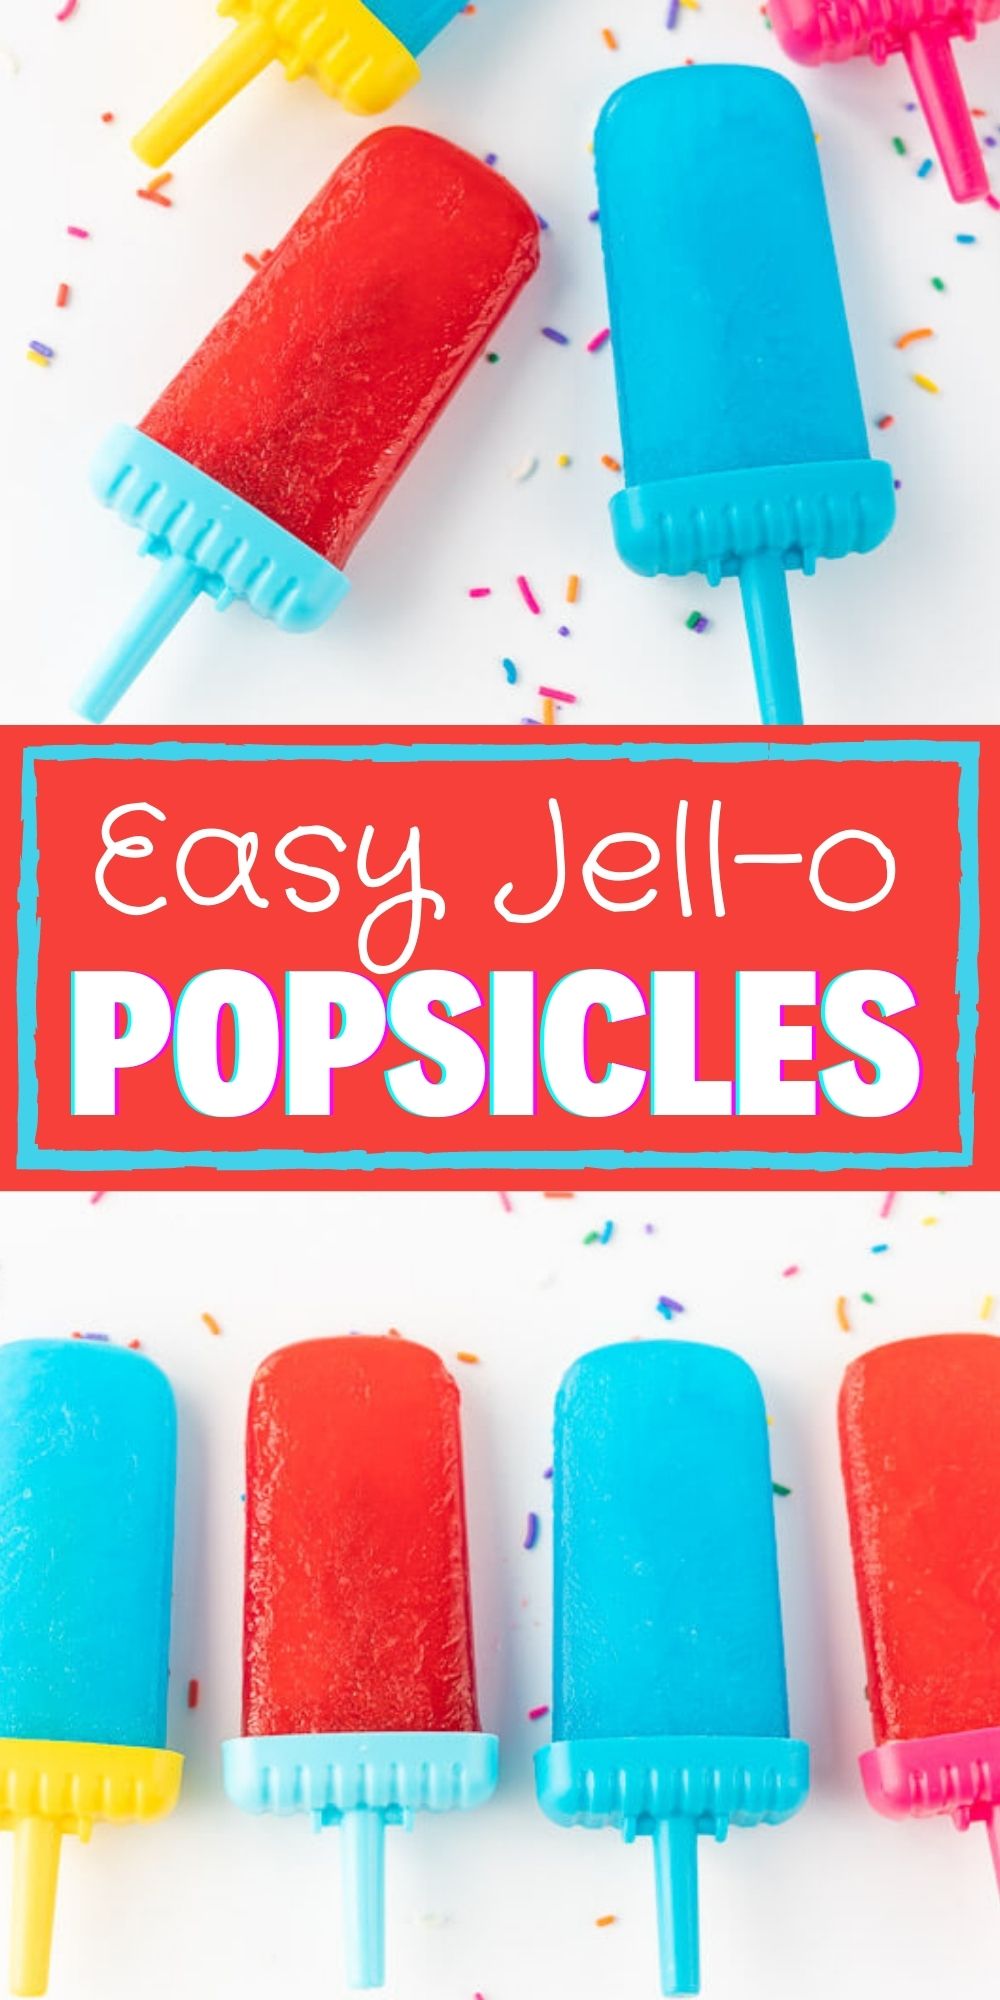 Easy to make jell-o popsicles. How to make popsicles easily with Jell-O that kids love. These homemade popsicles are delicious and they do not drip! The best DIY Popsicles.  This is the best popsicle recipes.  Learn how to make these frozen jello pops.  Everyone loves these Jello Ice pops.  #eatingonadime #jellorecipes #popsiclesrecipes #dessertrecipes 
